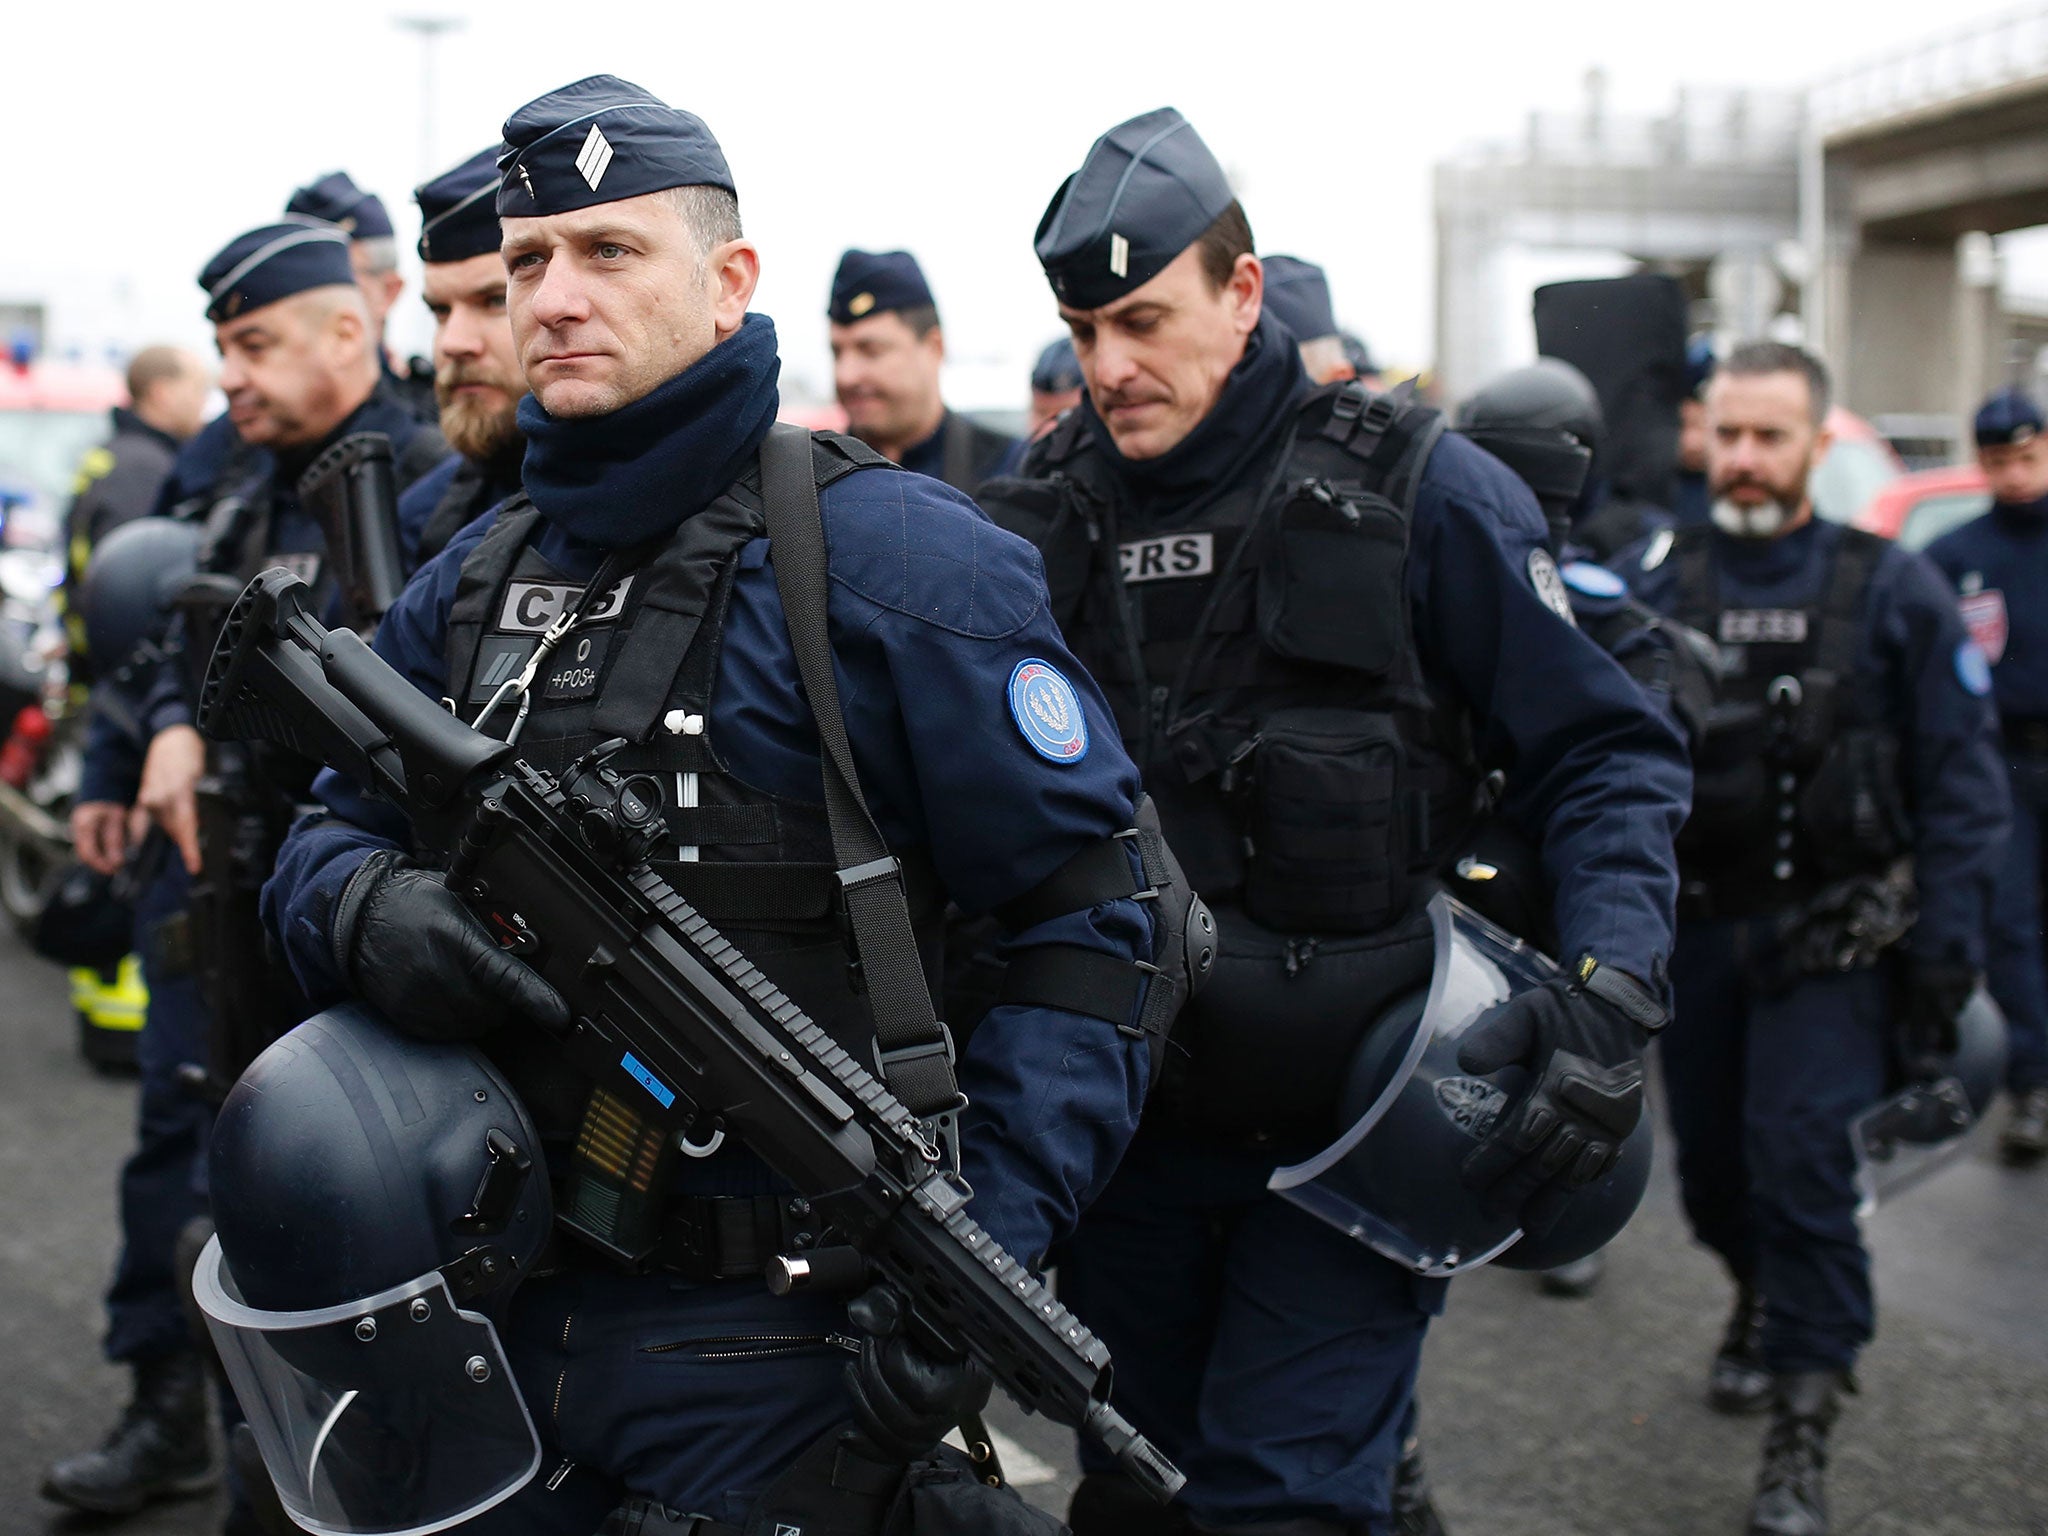 French police secure the area at Paris Orly airport in the aftermath of the shooting